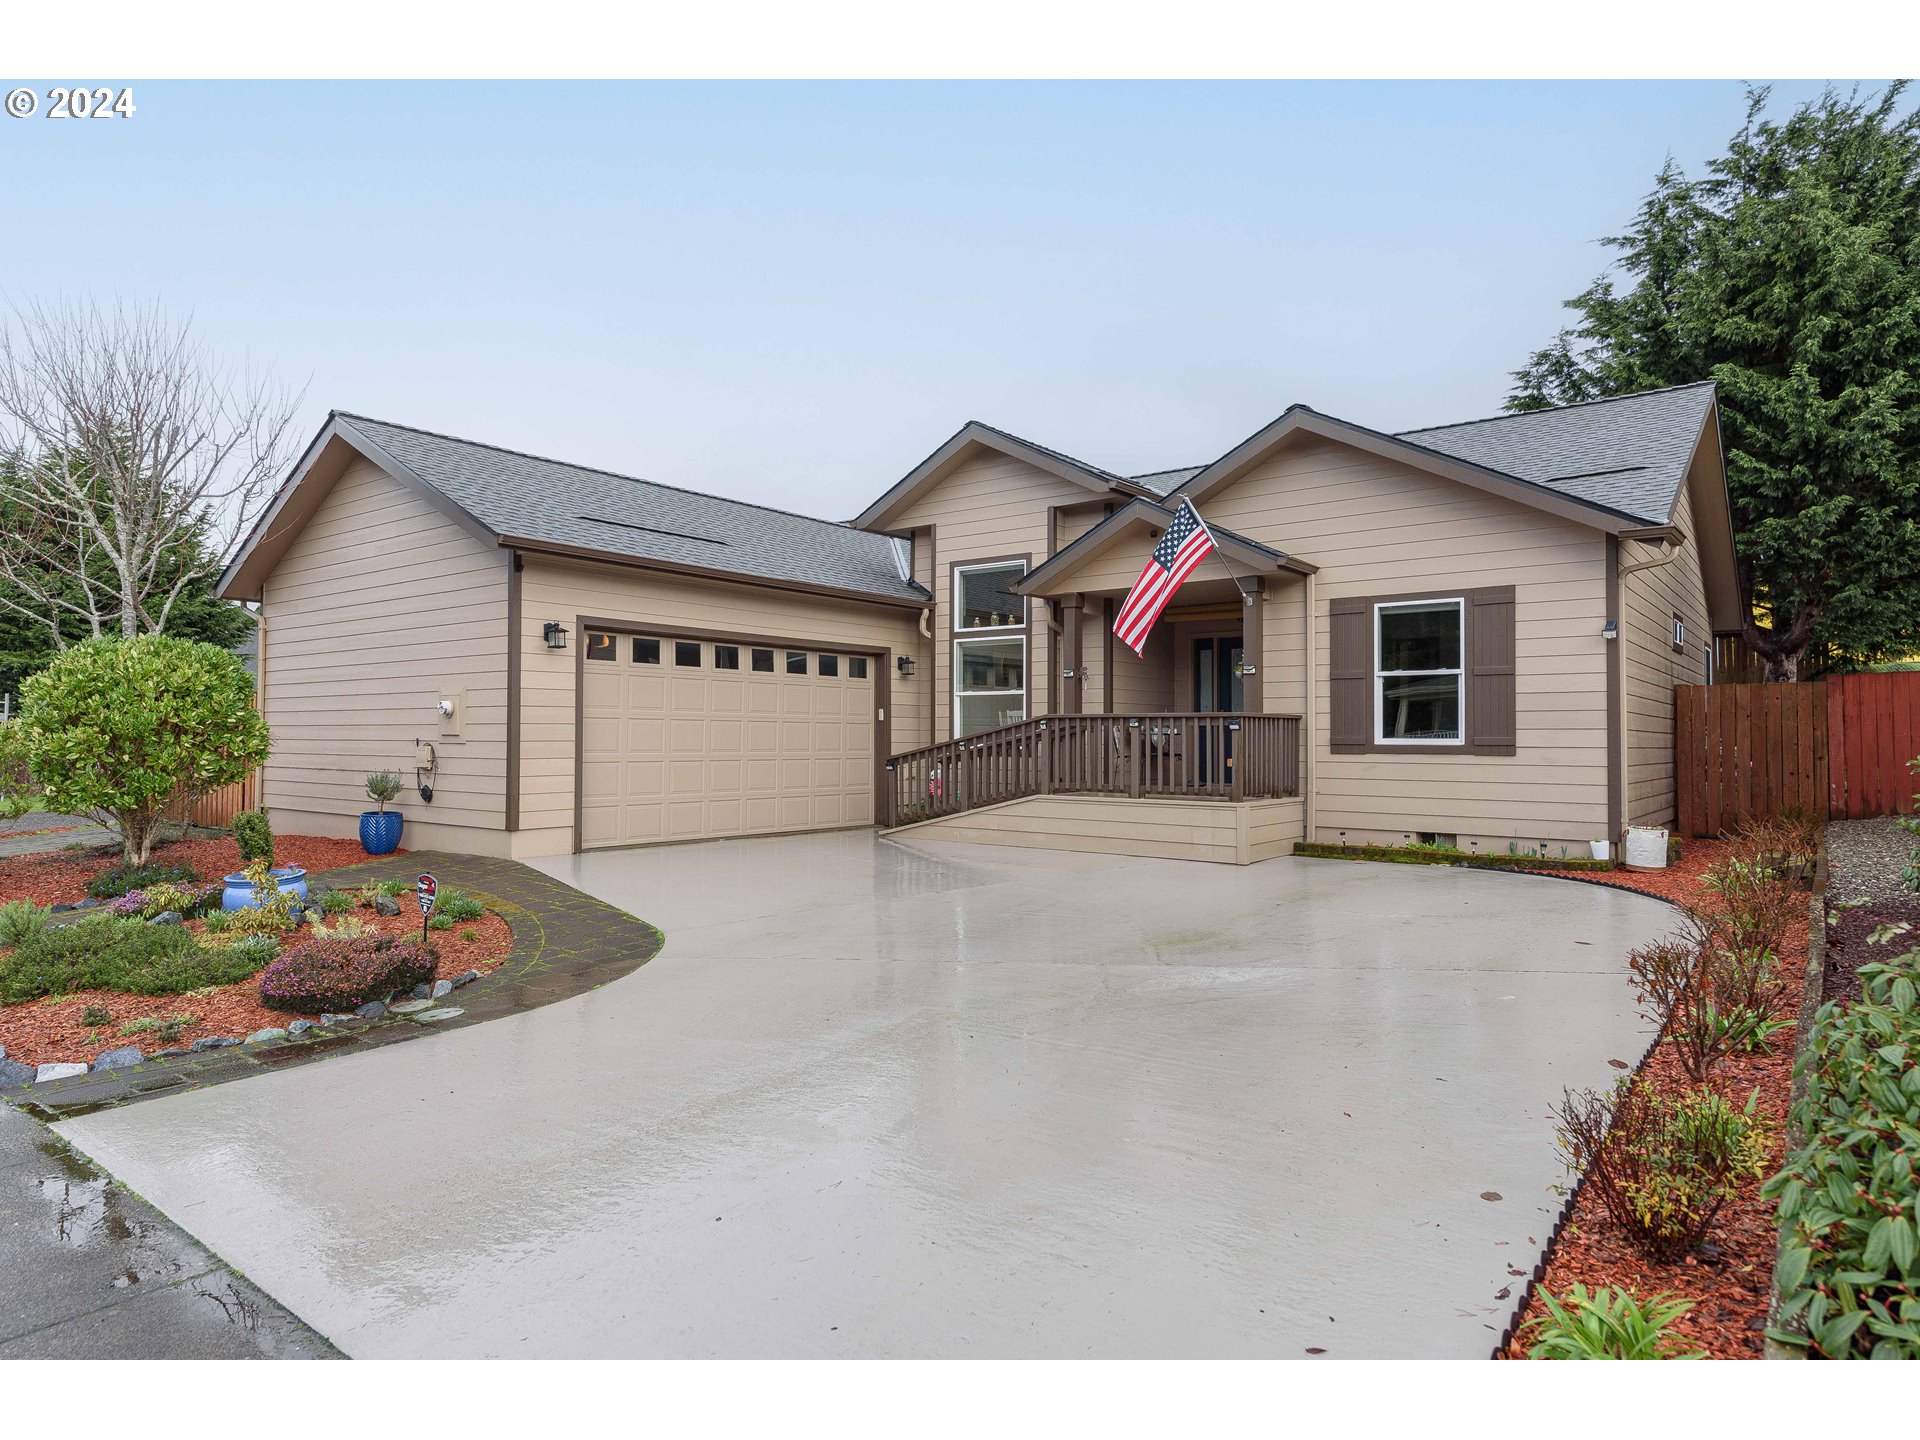 997 SEAGATE AVE, Coos Bay, OR 